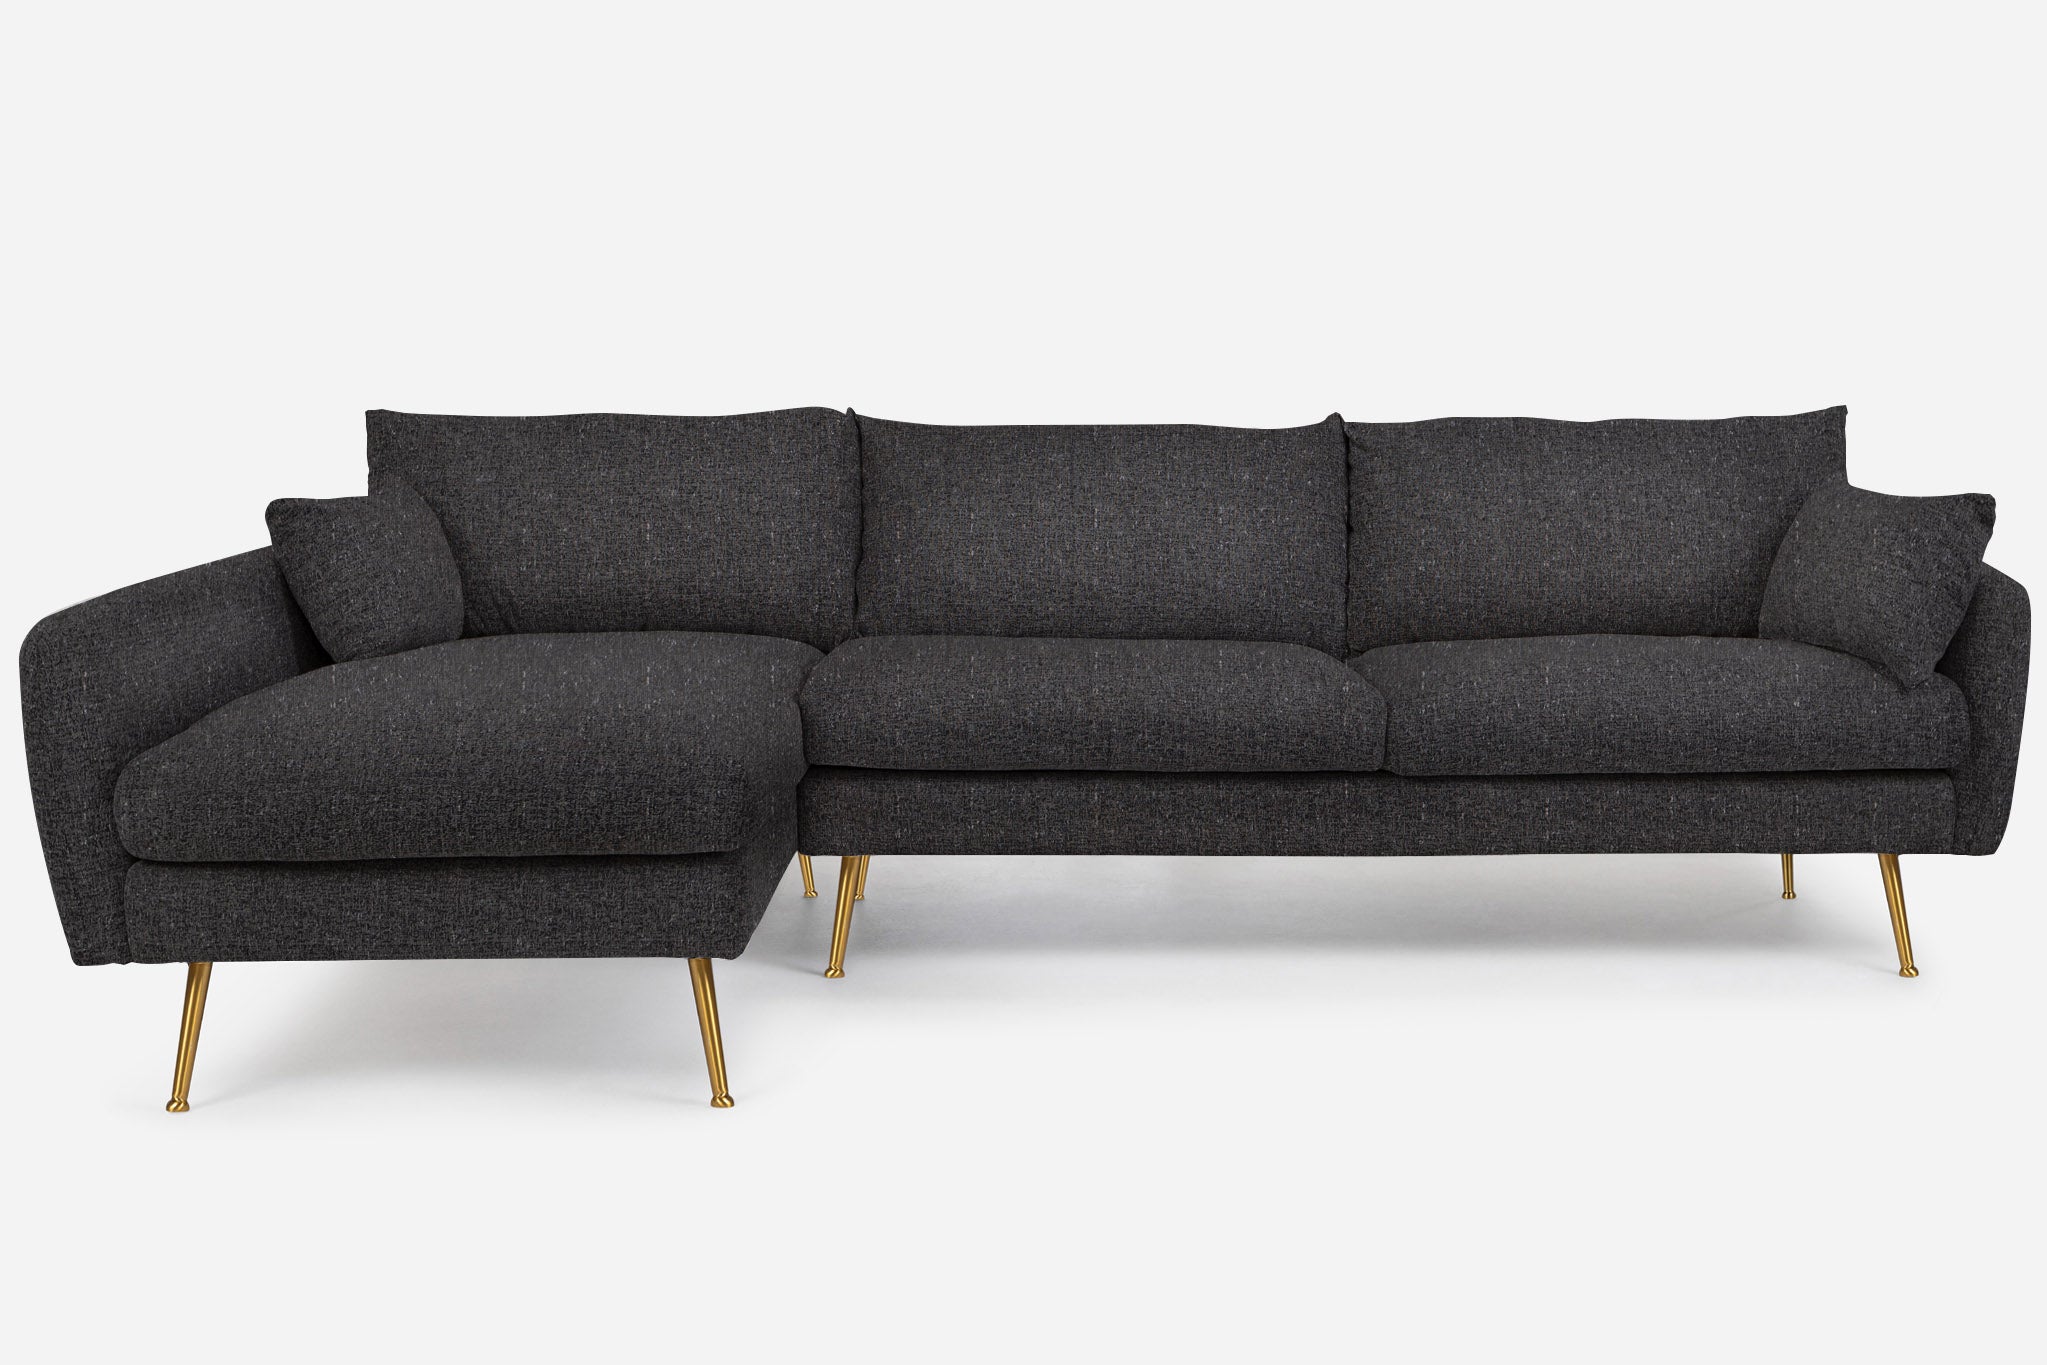 park sectional sofa shown in charcoal with gold legs left facing